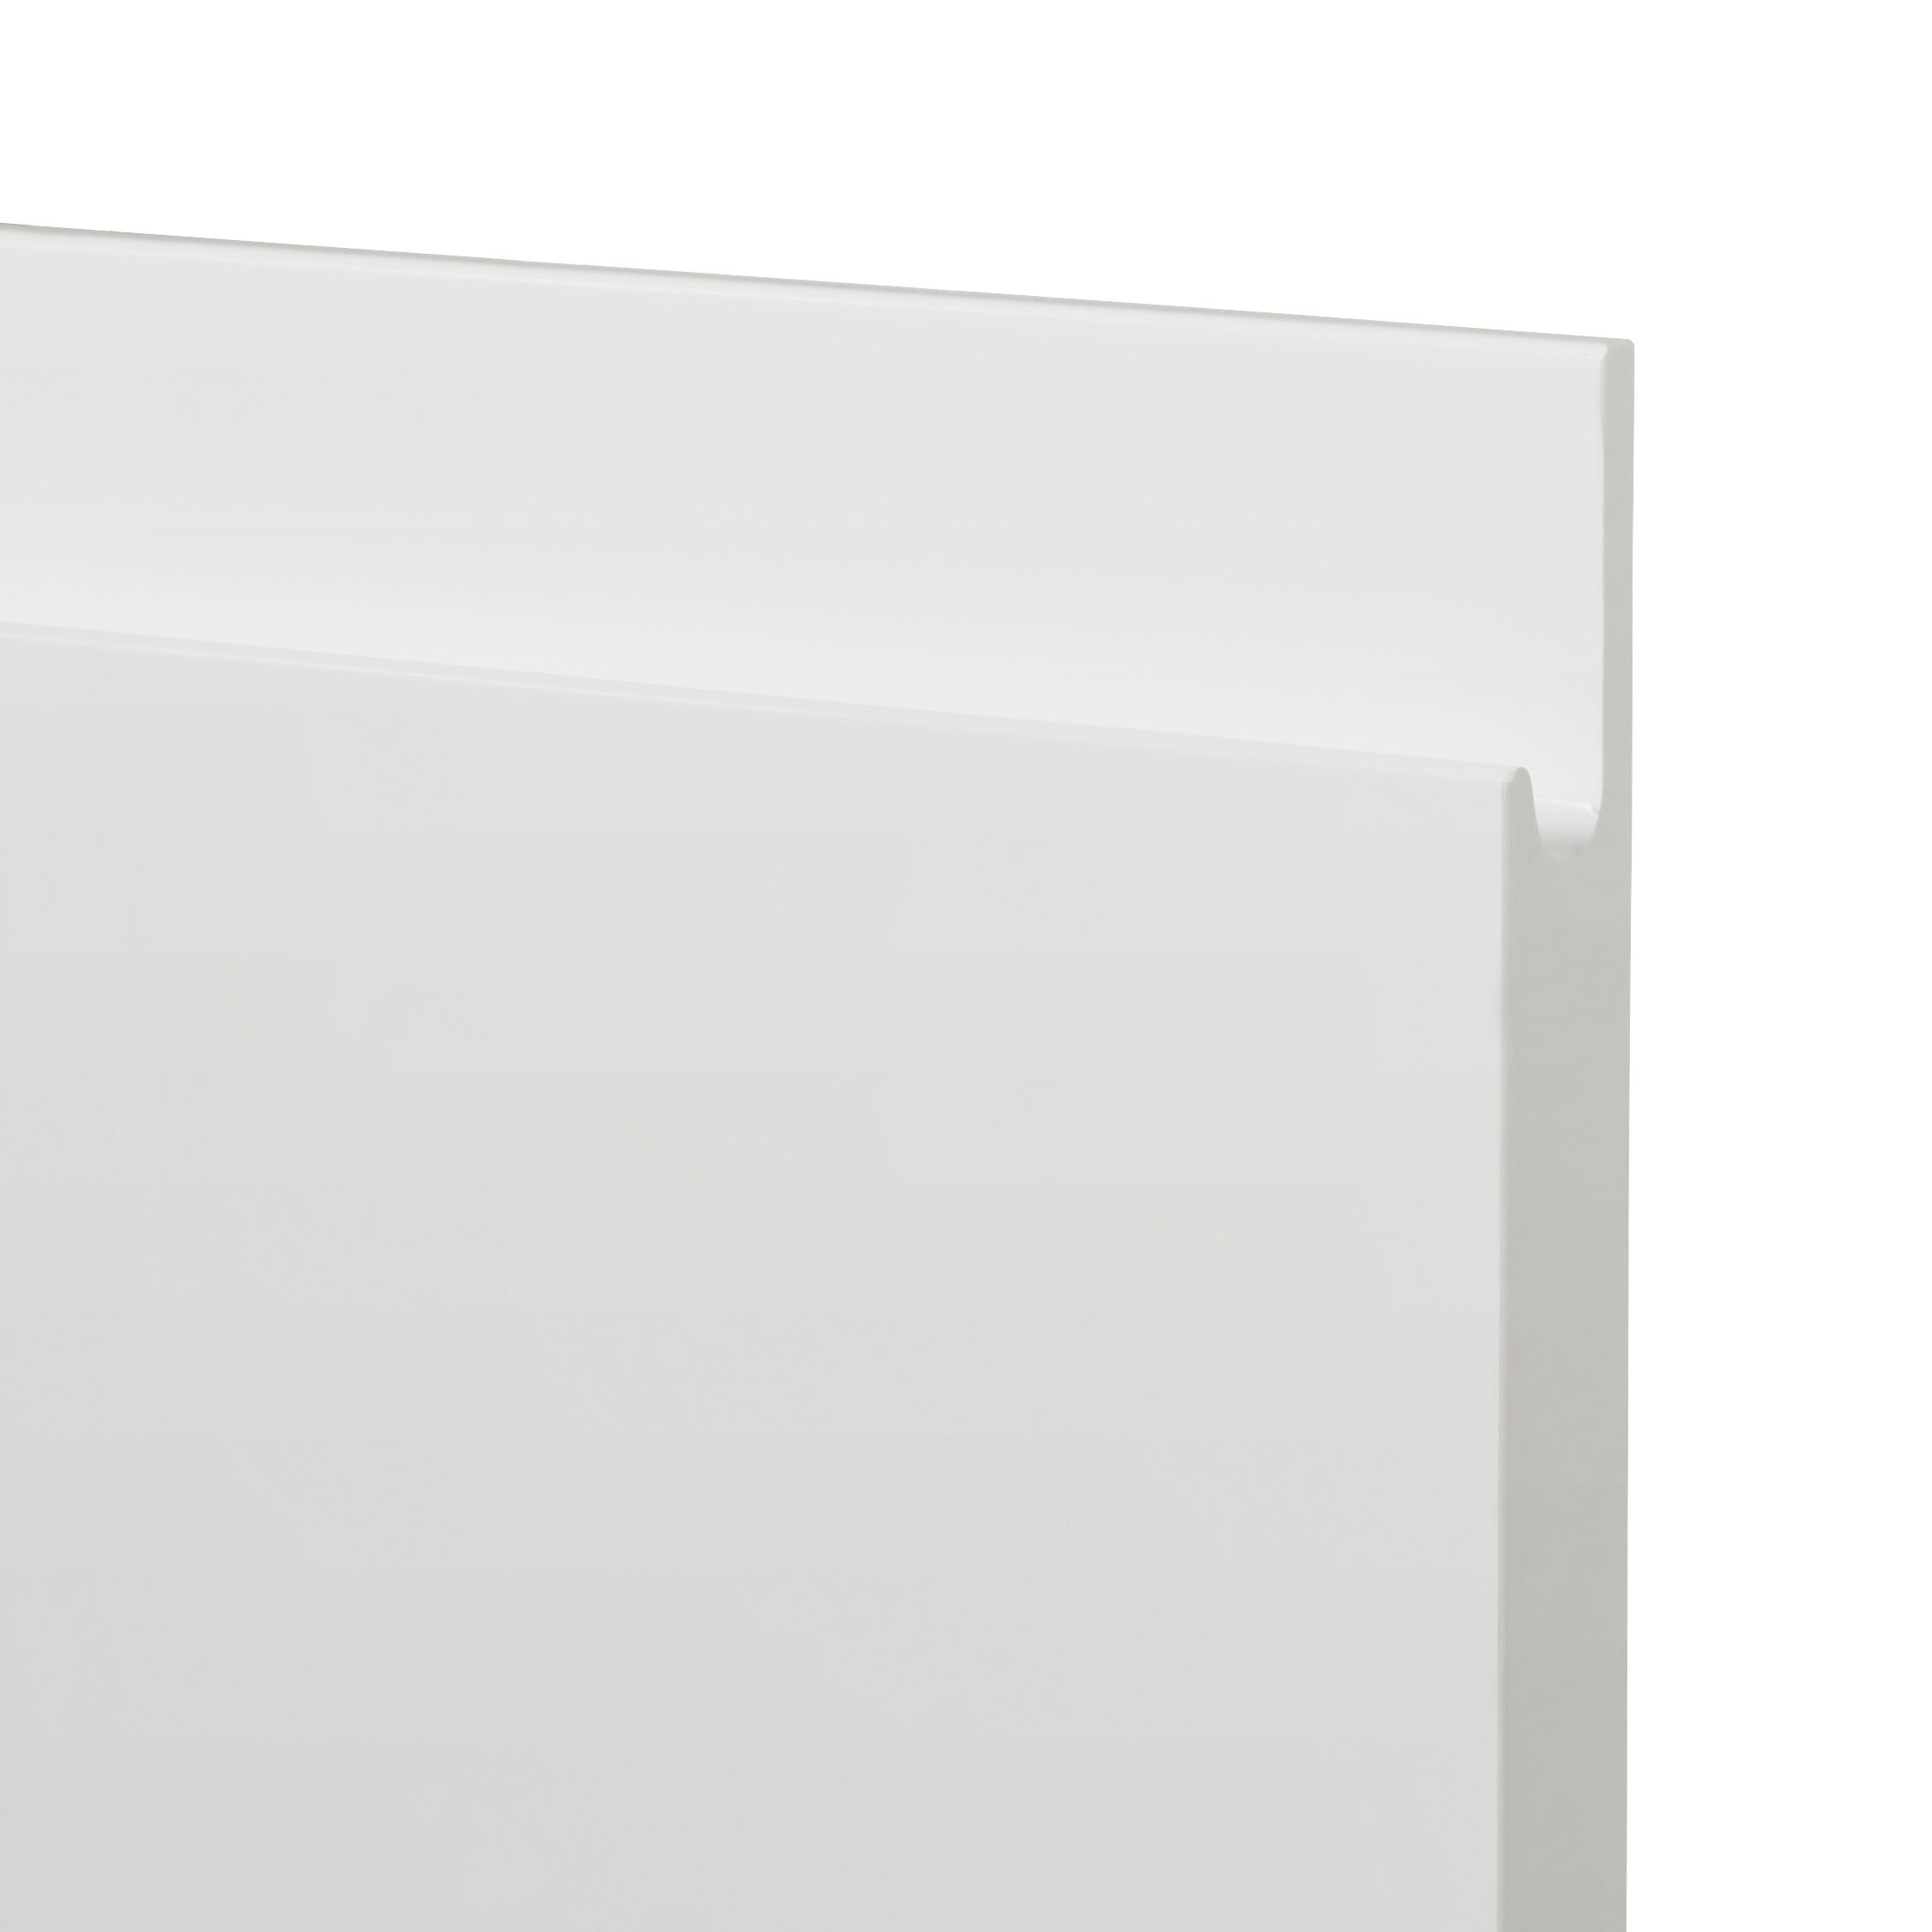 GoodHome Garcinia Gloss white integrated handle Tall wall Cabinet door (W)250mm (H)895mm (T)19mm